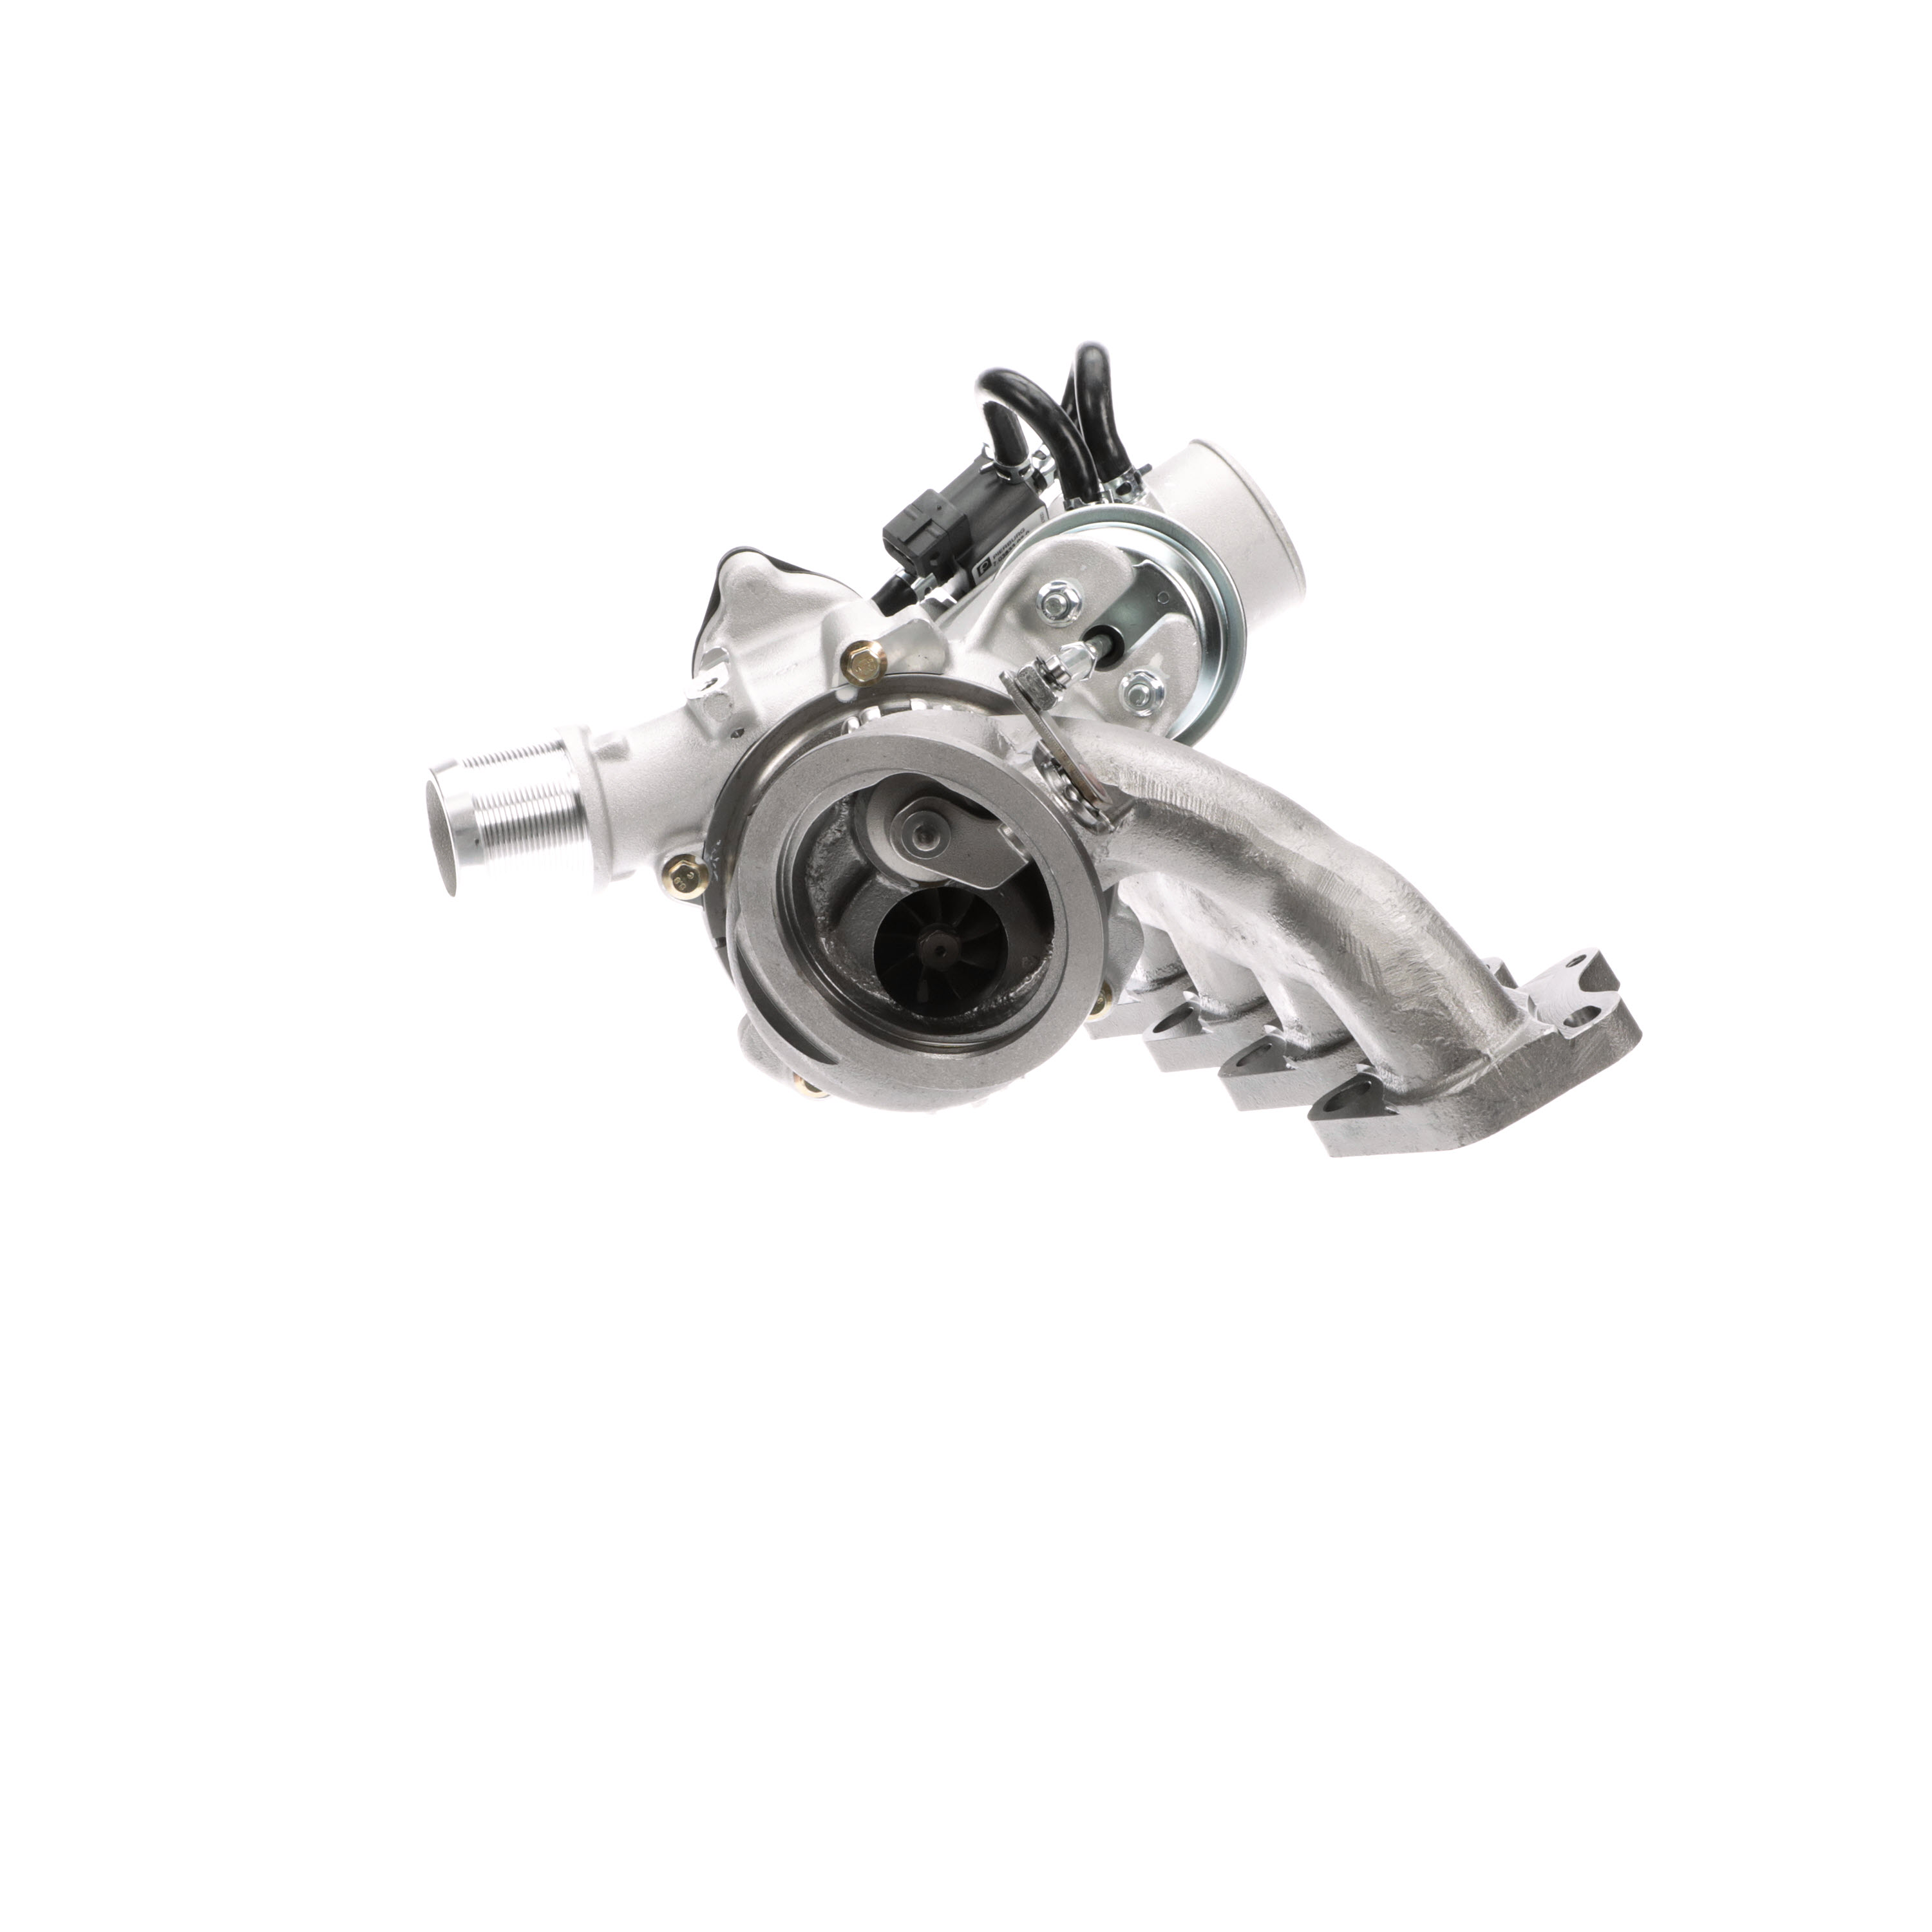 Dorman 667-203 Turbocharger for Specific Buick Chevrolet Models Fits  select: 2011-2015 CHEVROLET CRUZE, 2015-2019 CHEVROLET TRAX